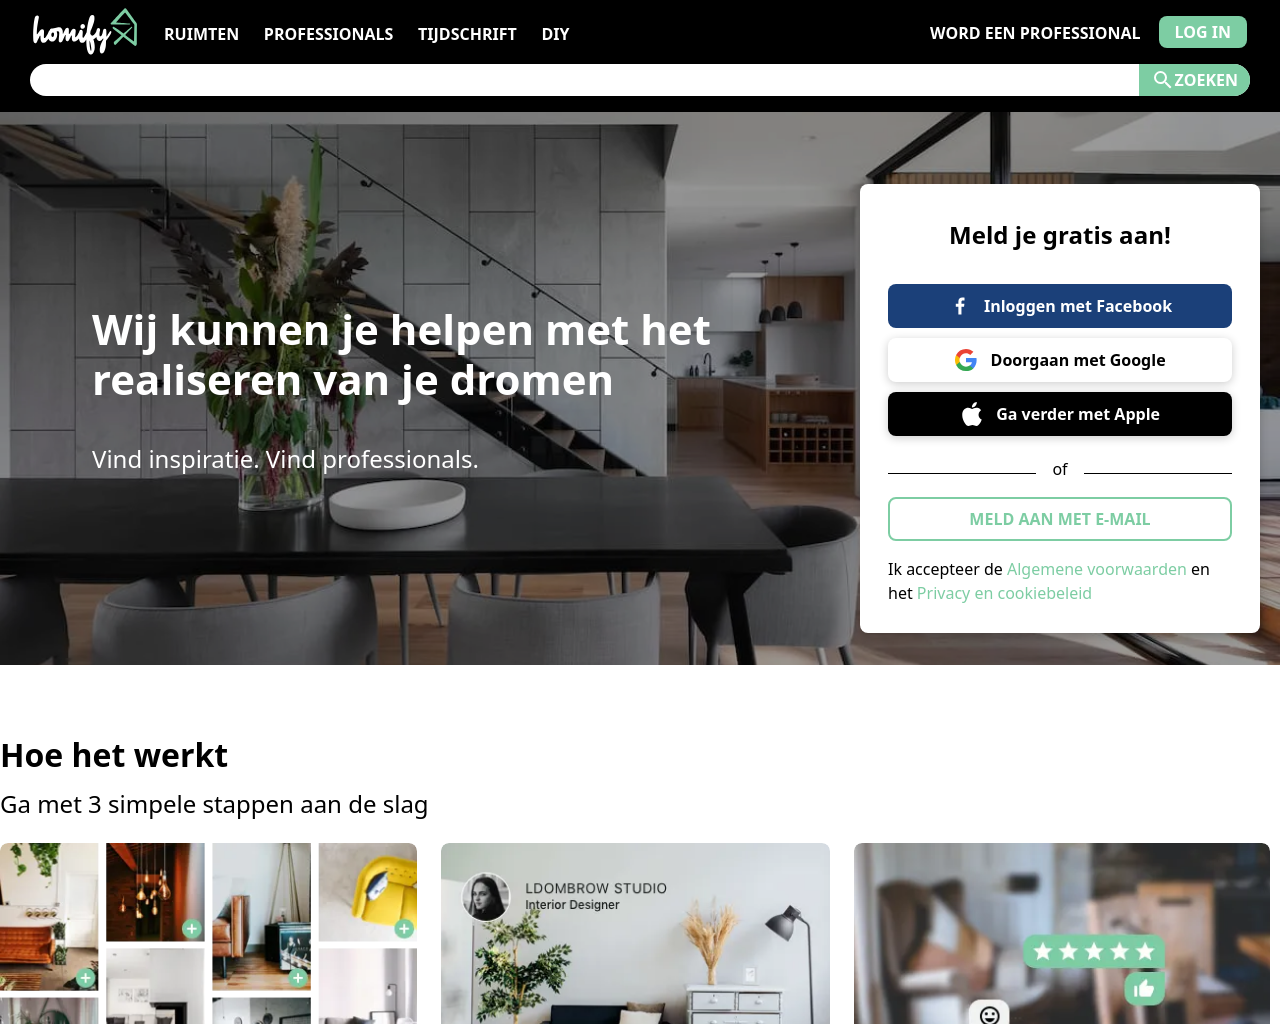 homify.nl